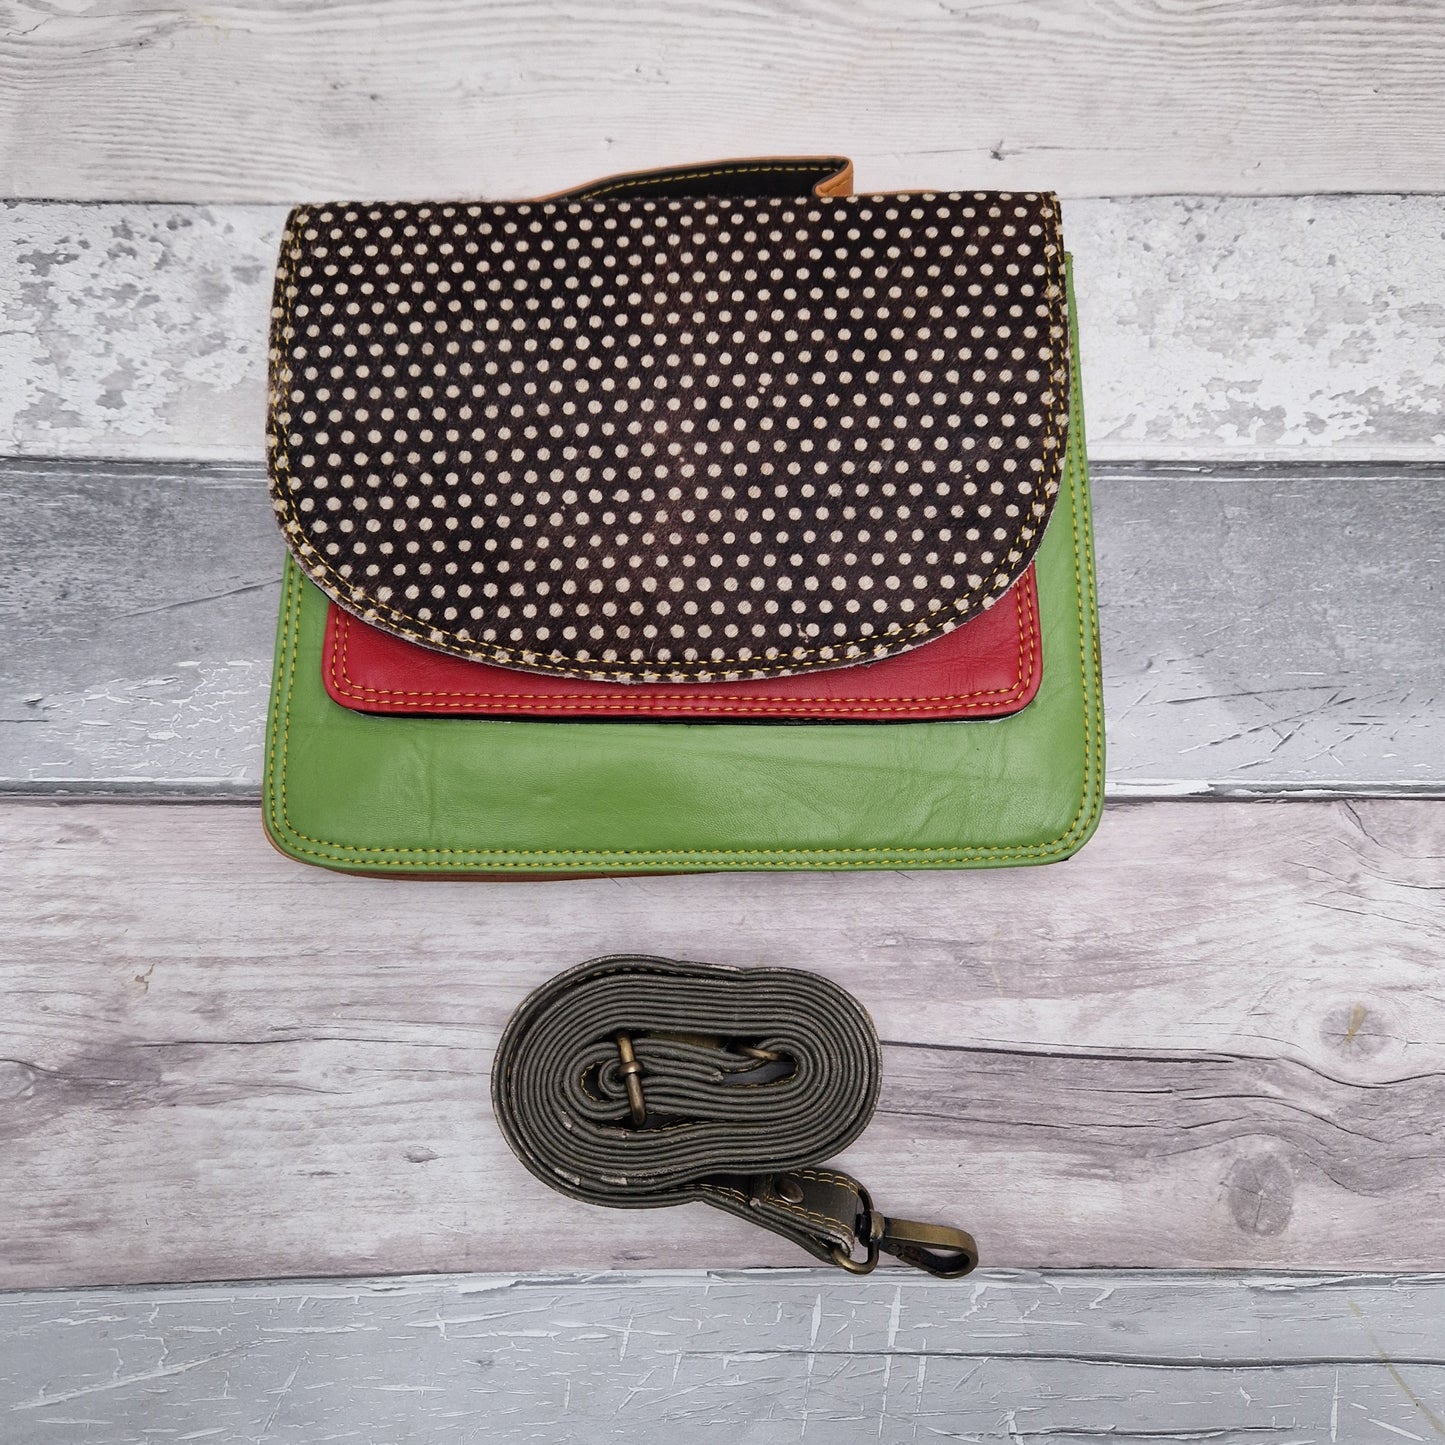 Bright Green leather bag with a textured spot print panel.